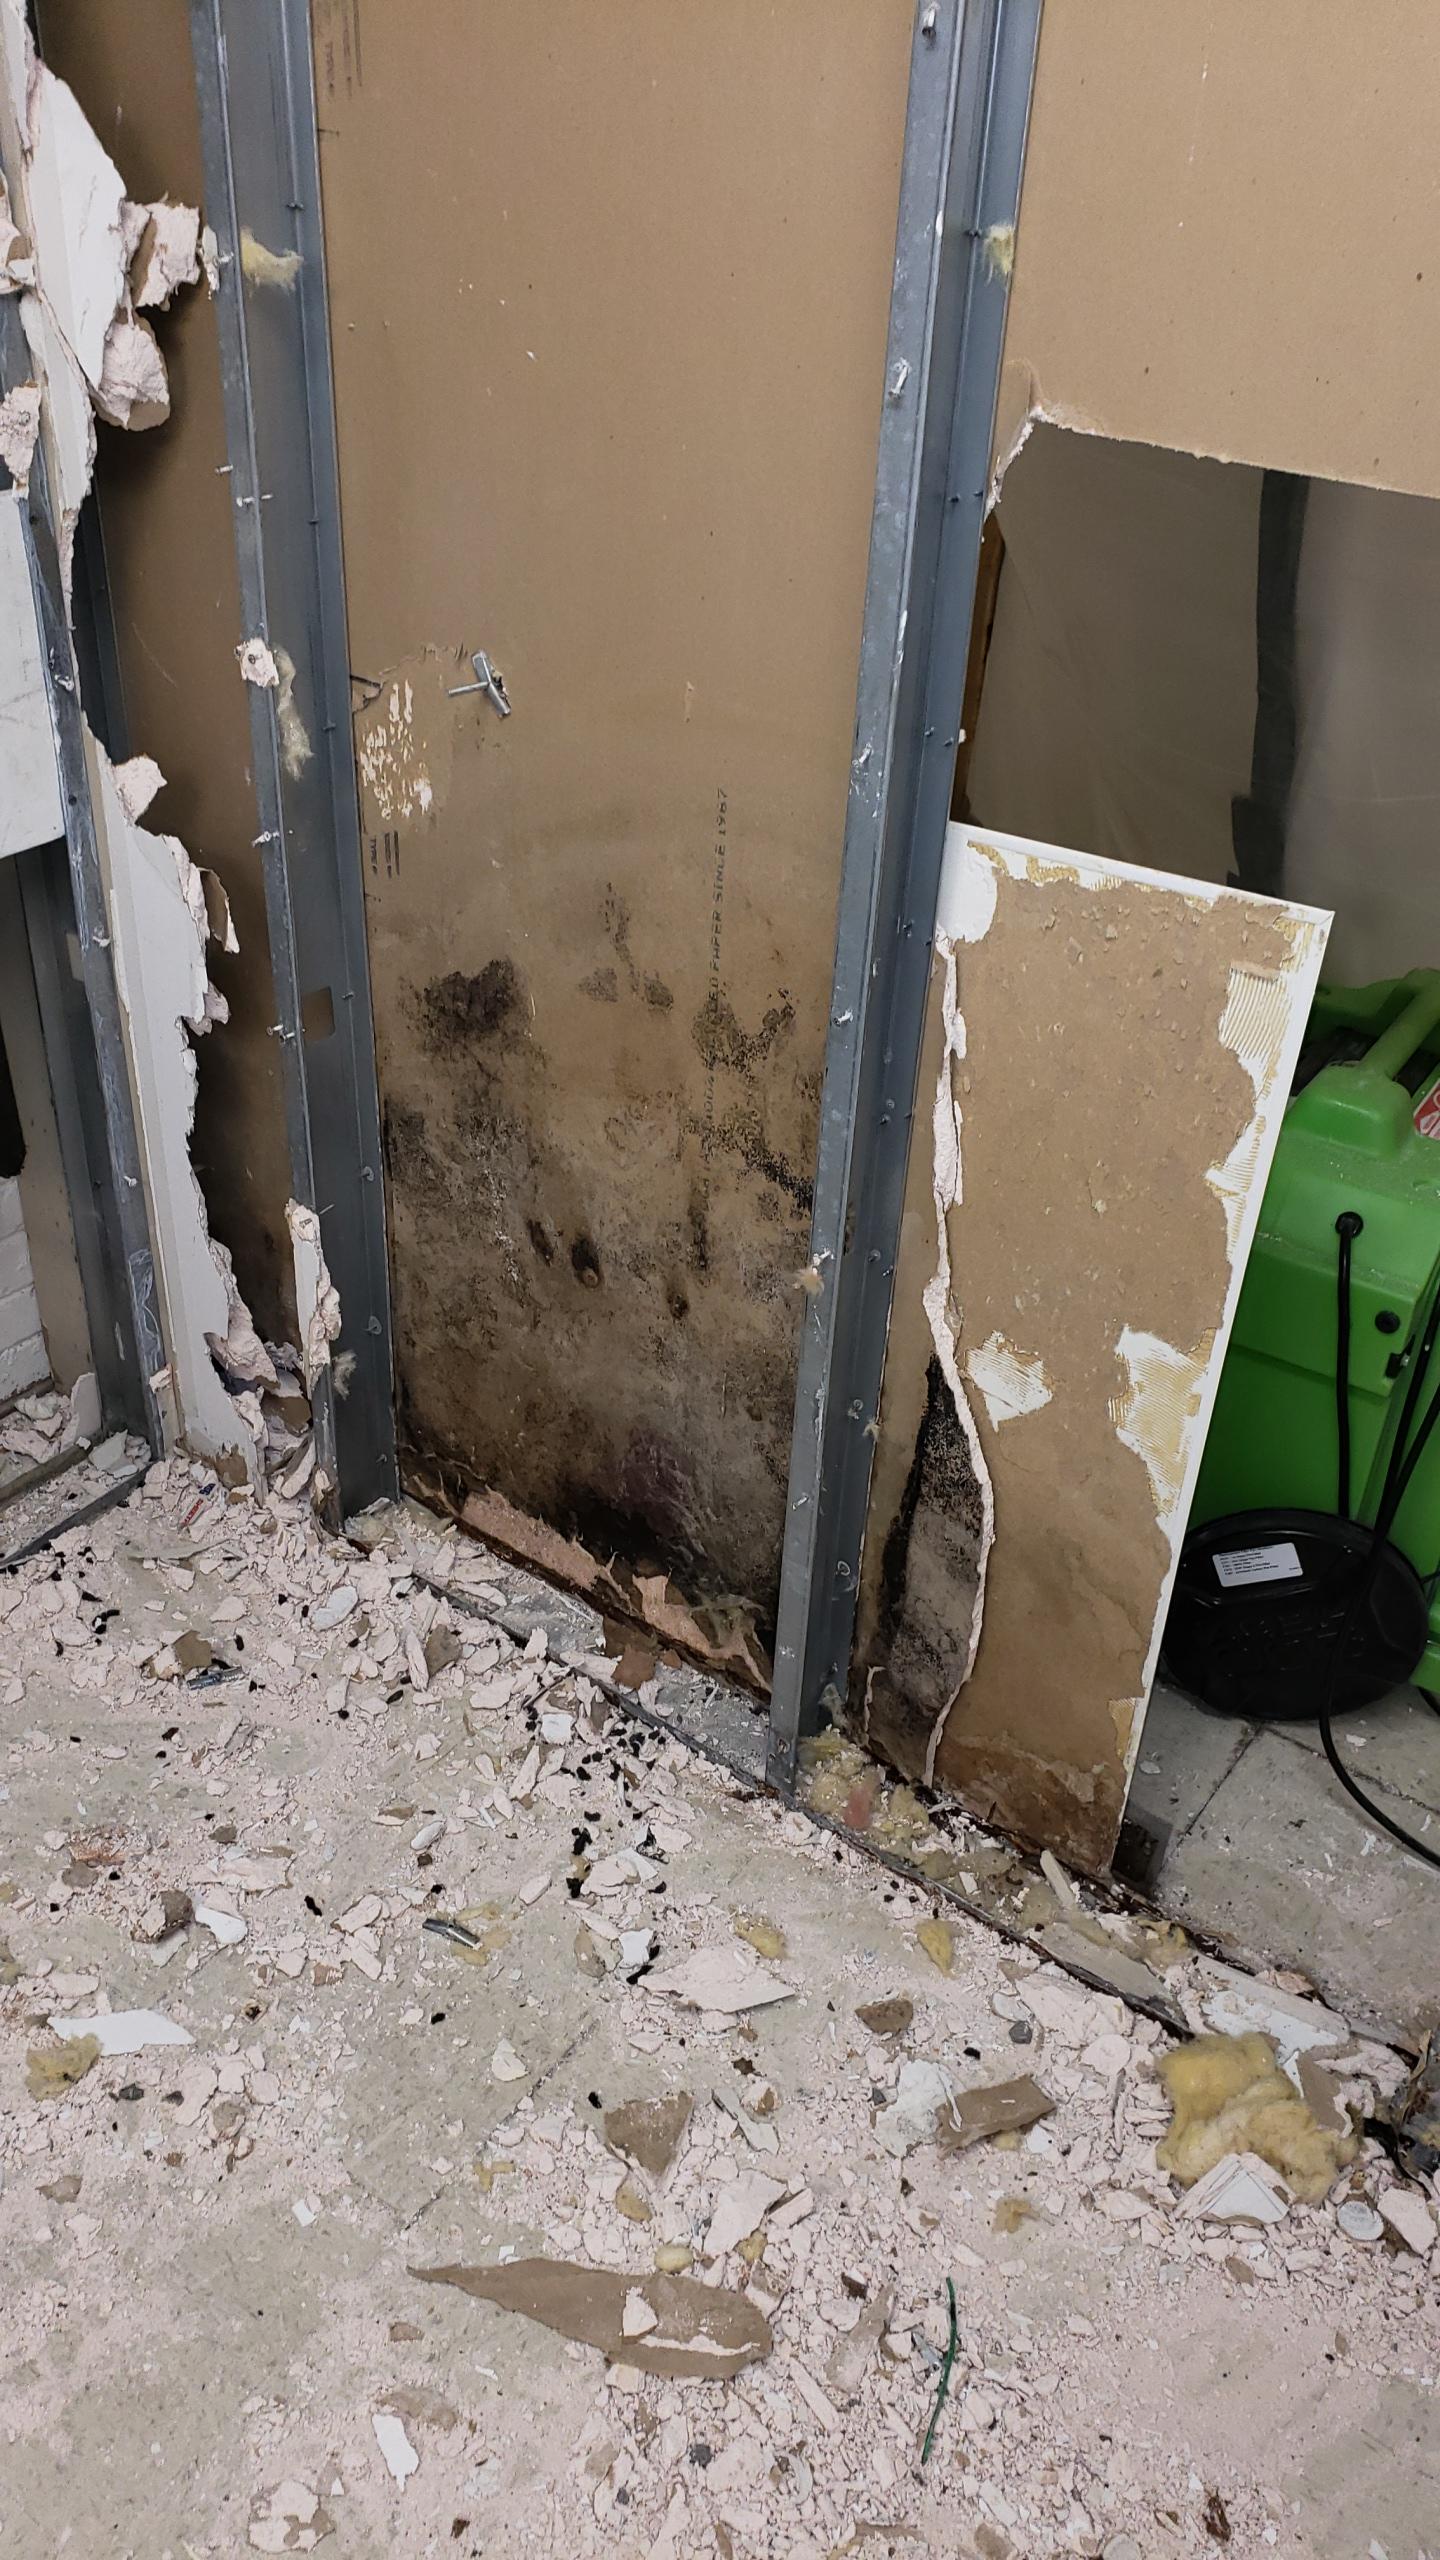 If you have a mold problem in your home or business, SERVPRO of Hyde Park/ Central Austin can help.